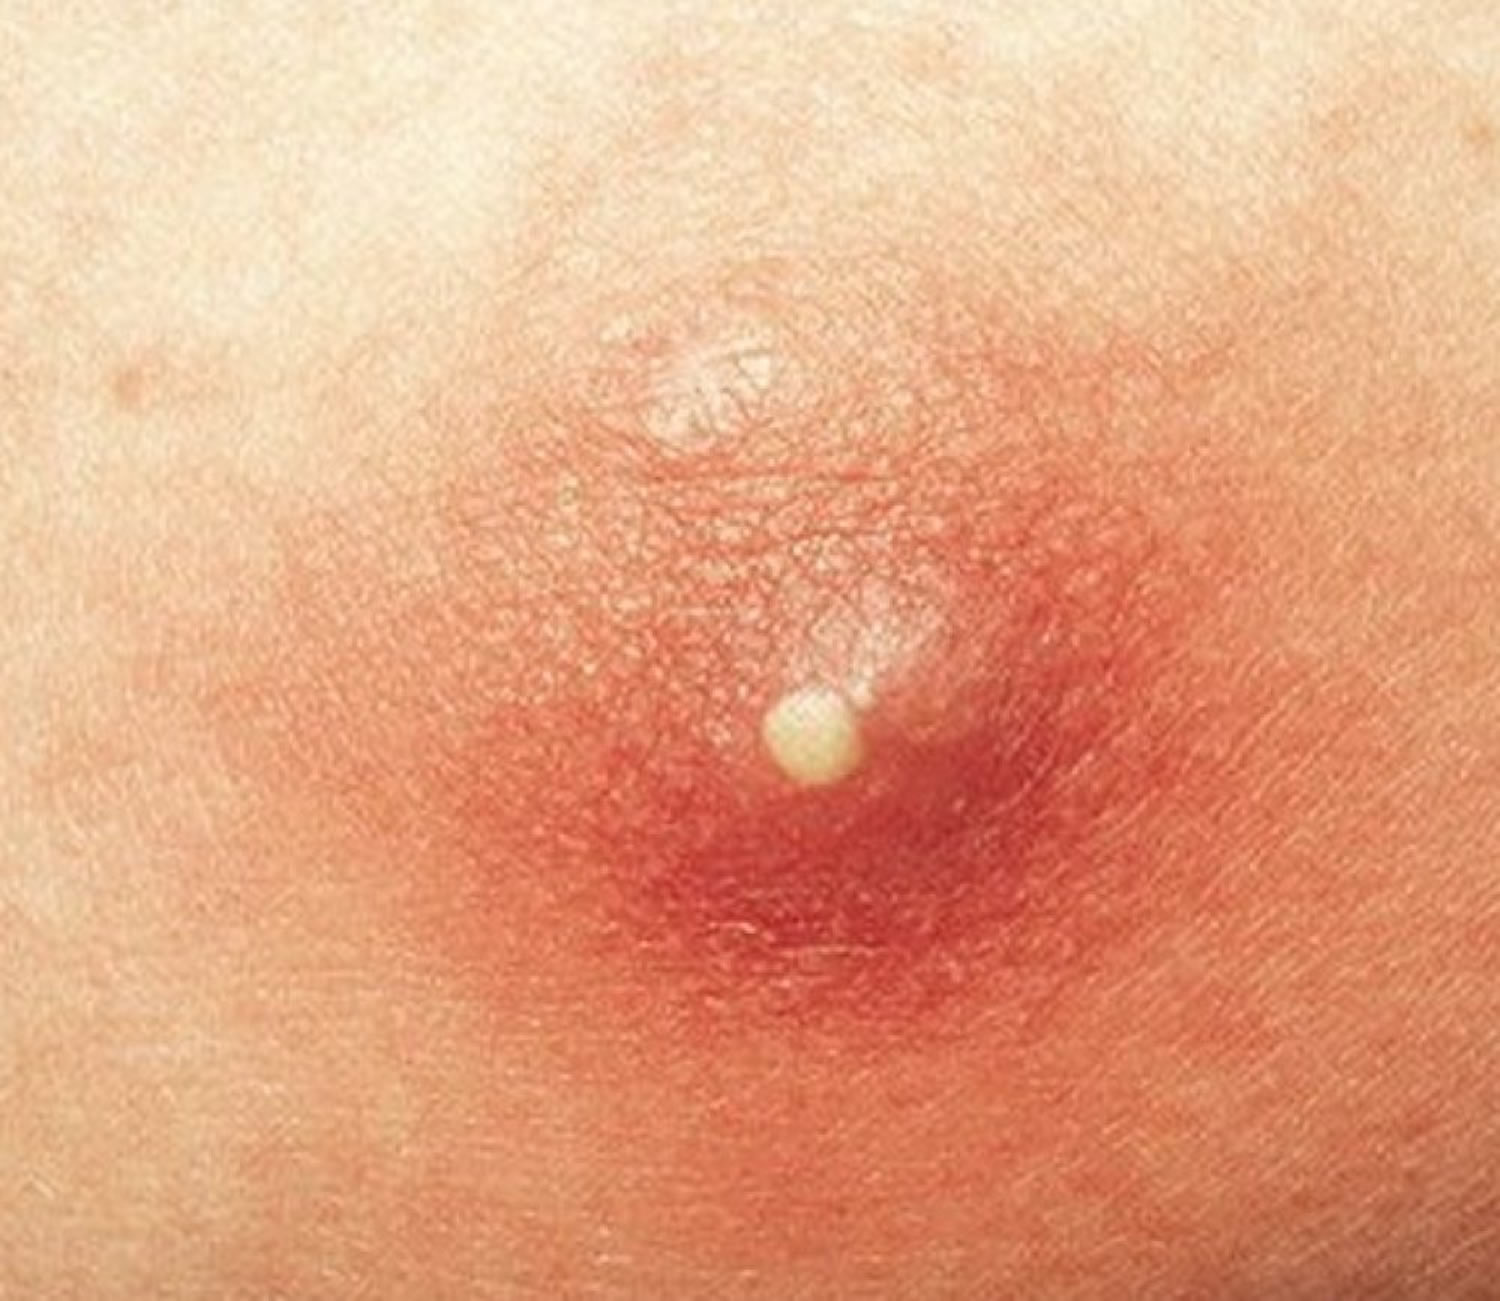 Brown Papules on the Penis | MDedge Dermatology